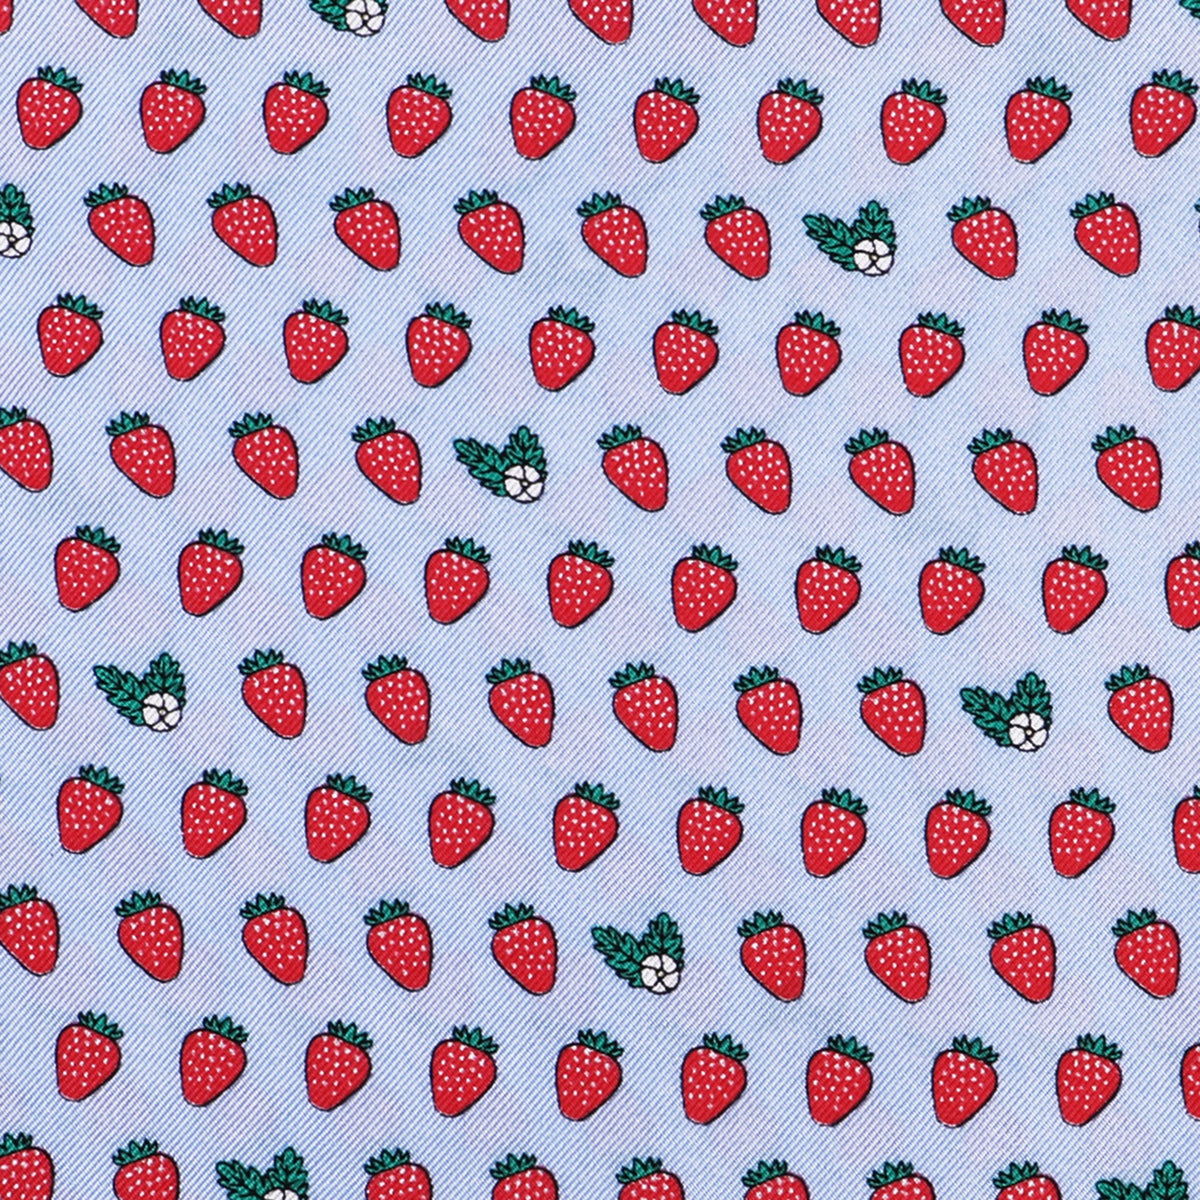 Limited Edition NOLA Couture X Haspel Lt. Blue Strawberry Print Pocket Square - O/S